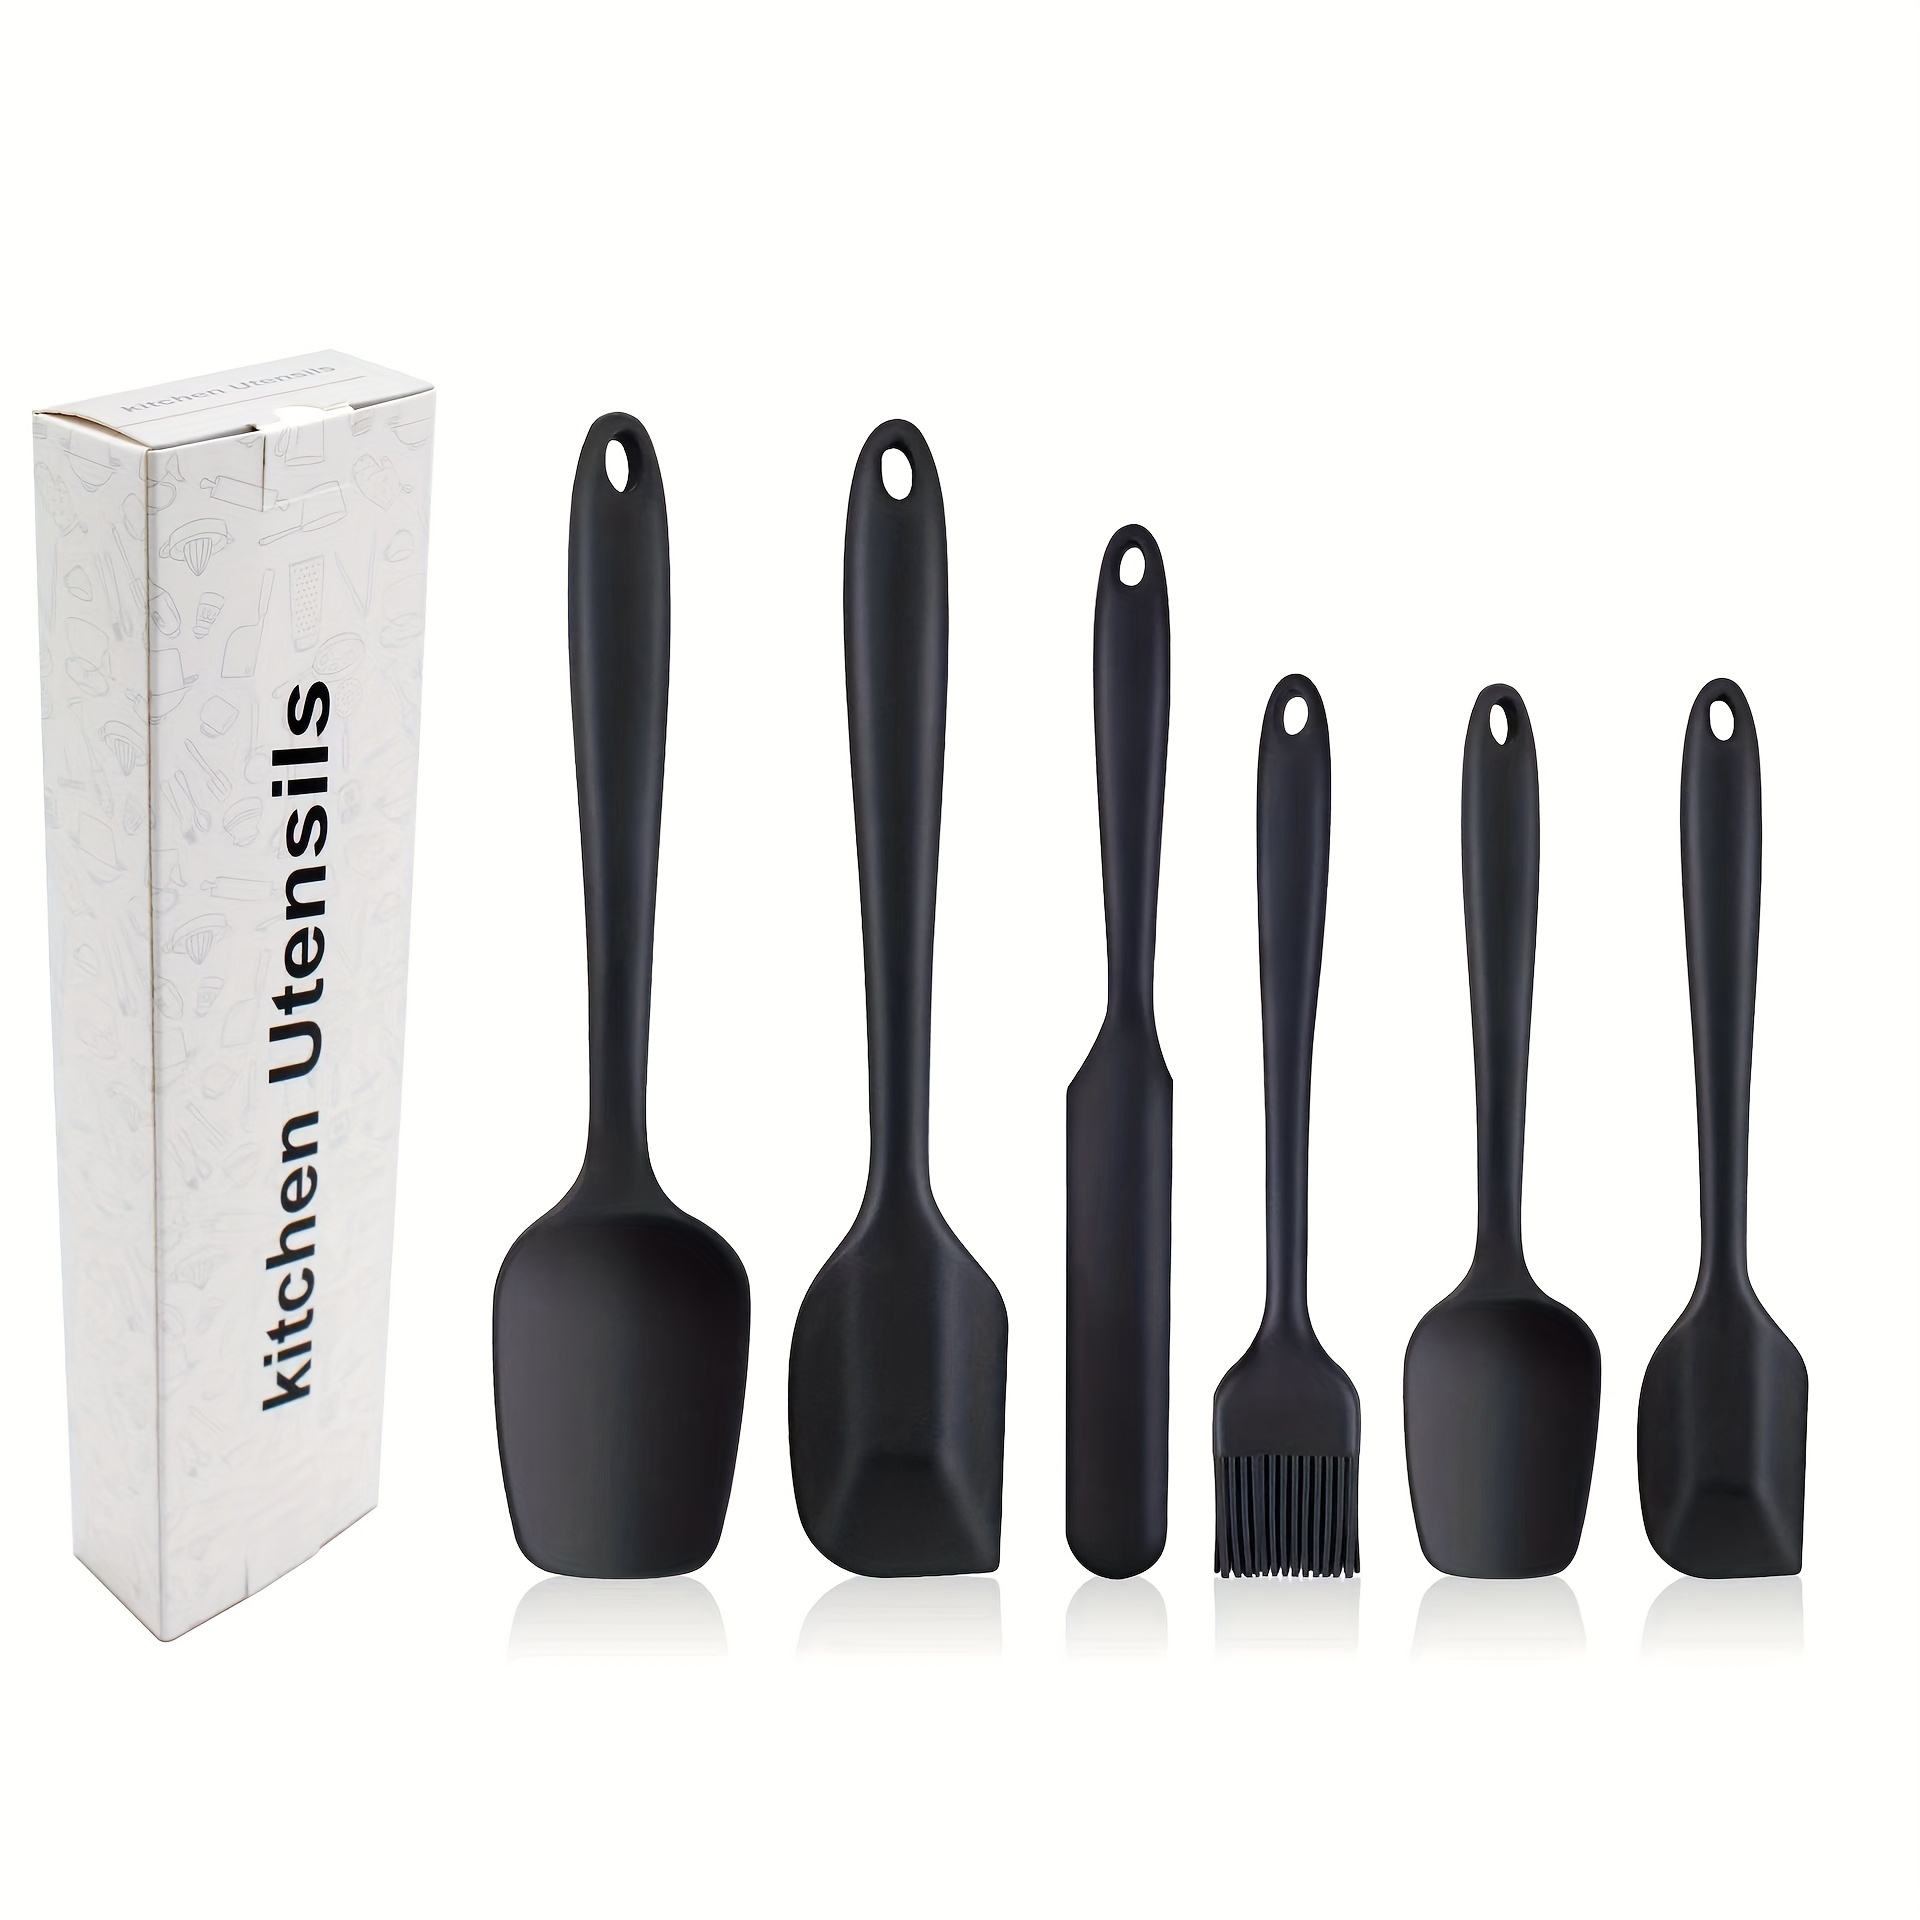  Spatulas Set of 6, Food Grade Silicone Spatulas, Rubber  Spatulas Heat Resistant, Seamless One Piece Design, Stainless Steel Core, Kitchen  Utensils Nonstick for for Cooking, Baking and Mixing (Black): Home 